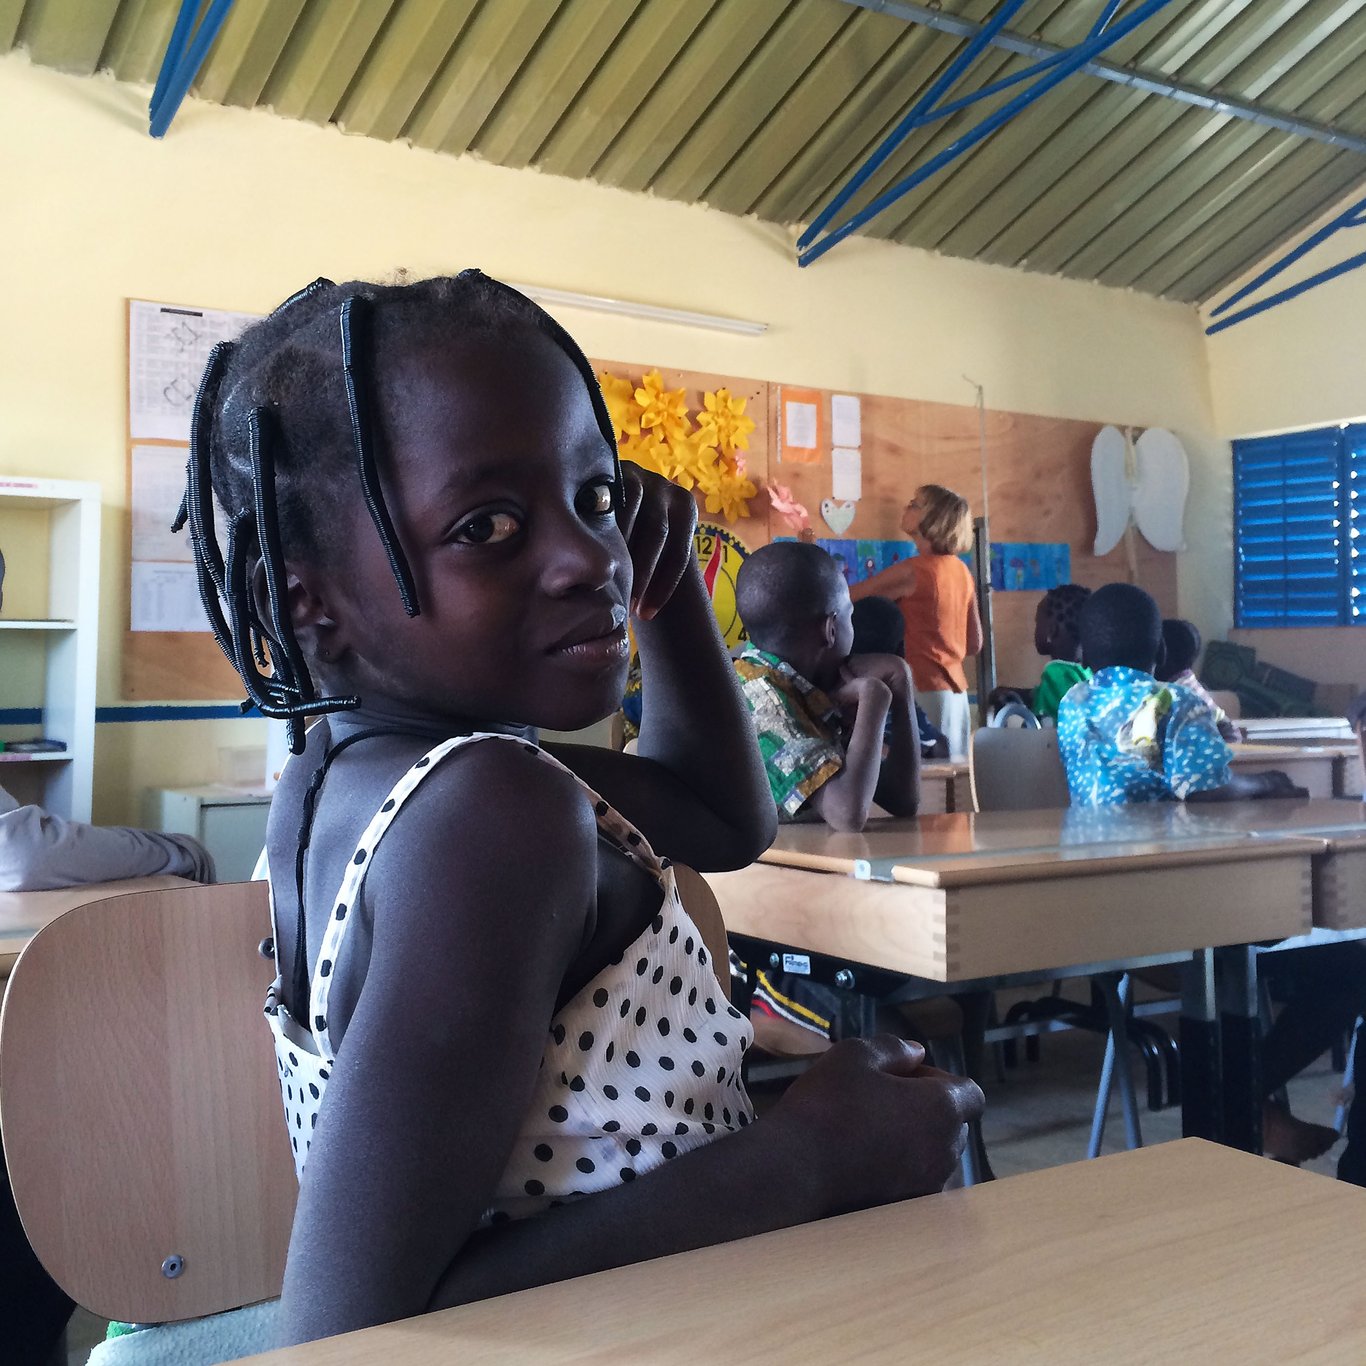 A girl in a classroom in Burkina Faso looks directly at the camera